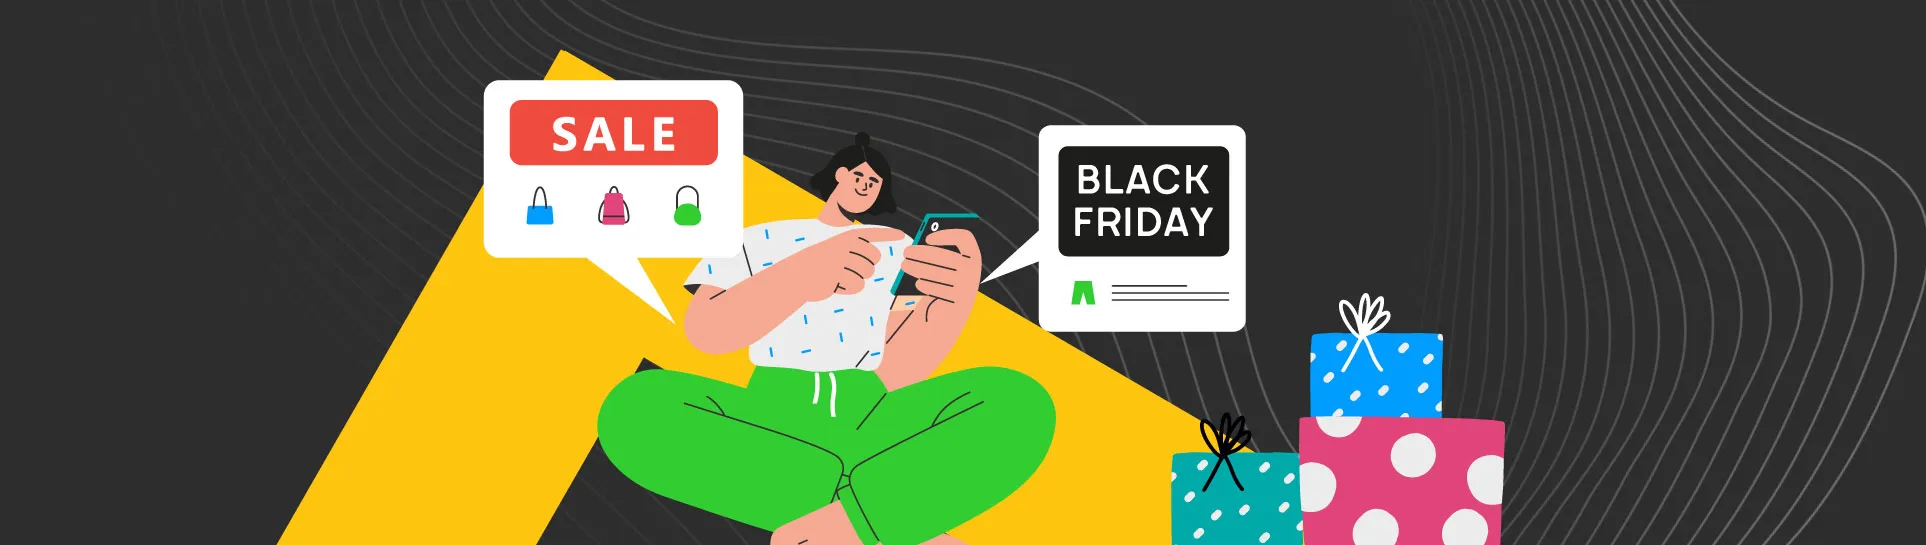 6 Lessons We Learned From Black Friday 2016